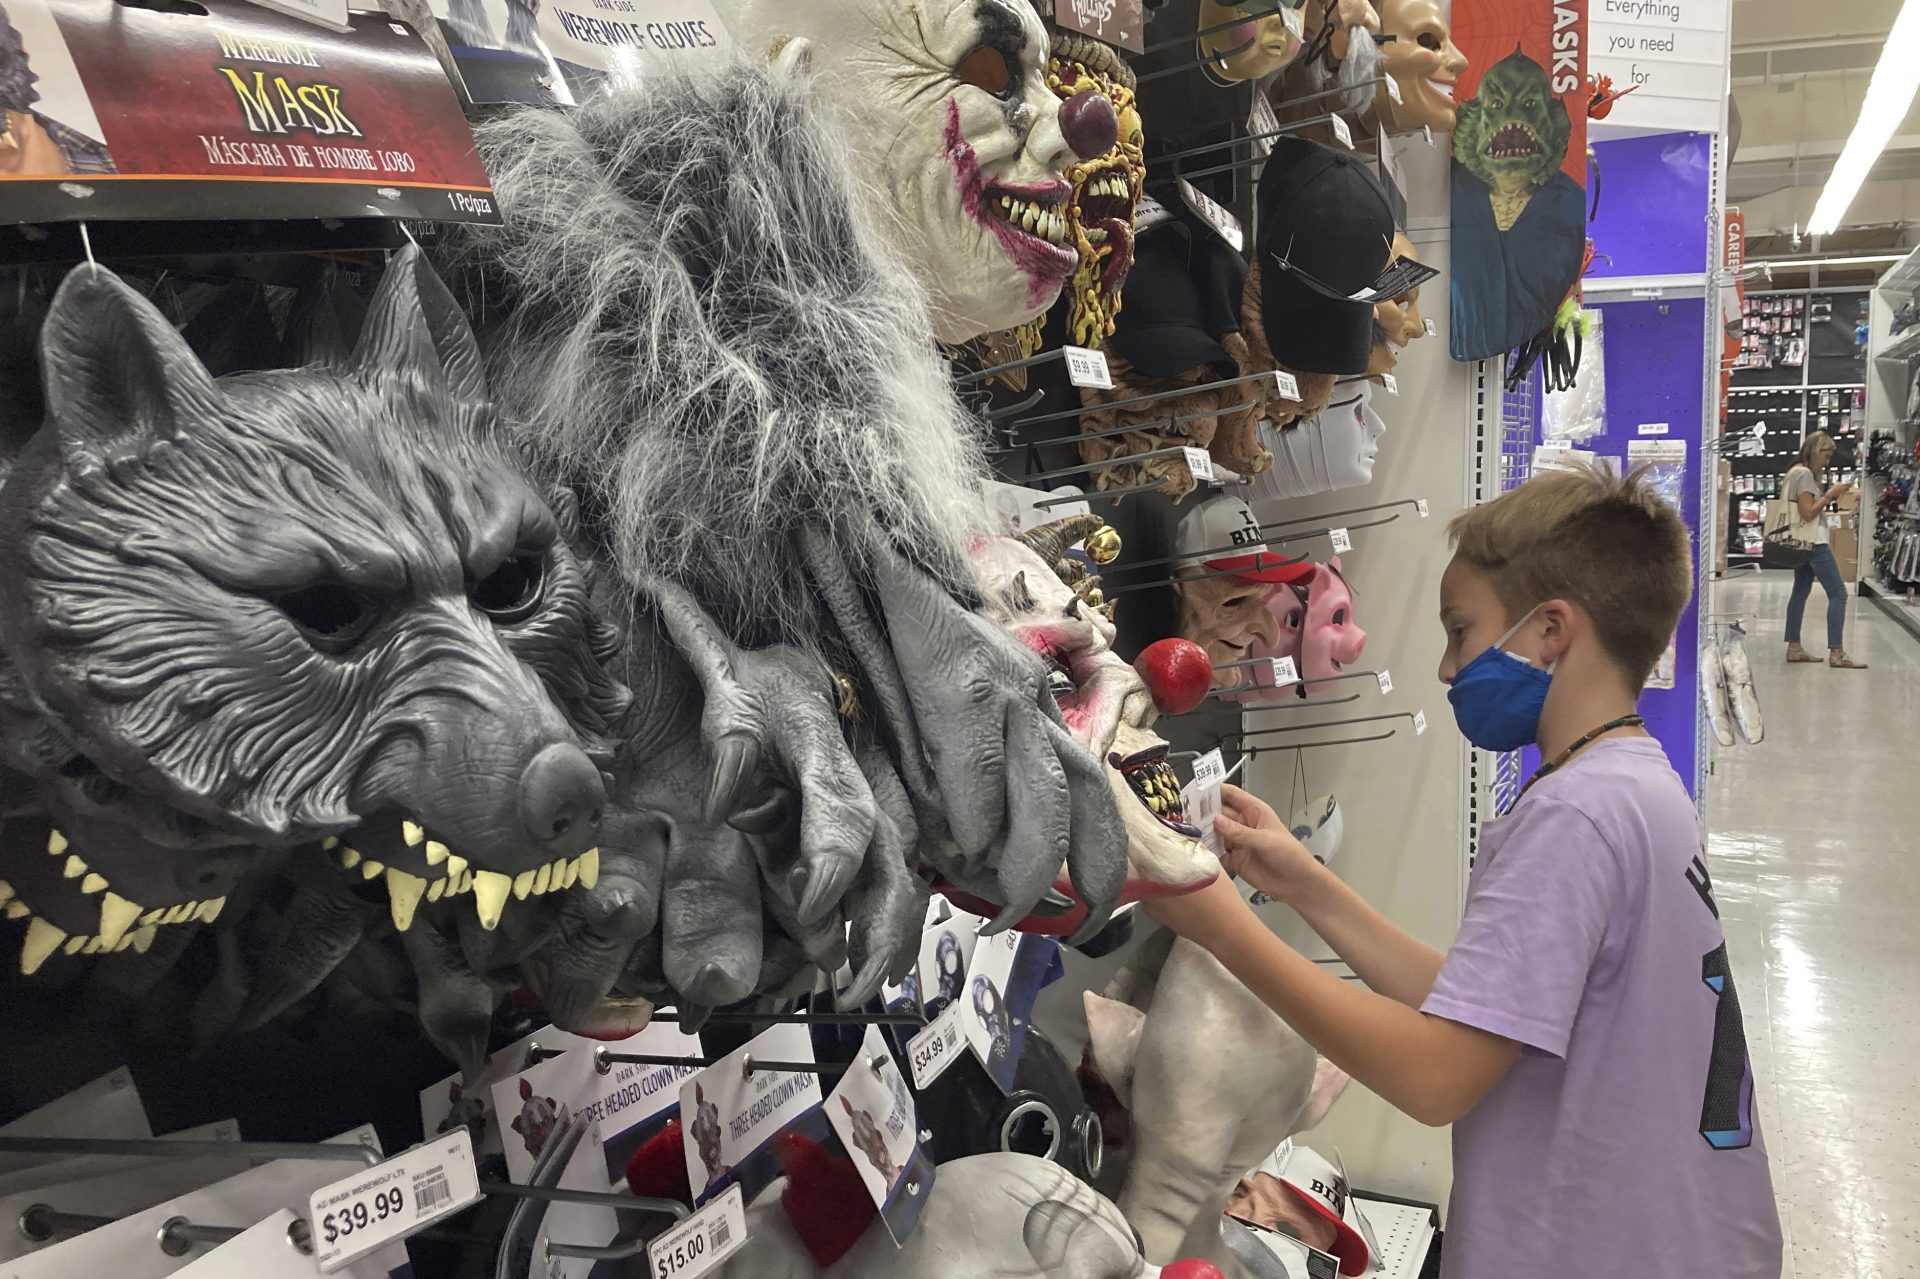 A young customer looks at a Halloween mask at a Party City store, Oct. 6, 2021, in Miami. Prices for U.S. consumers jumped 6.2% in October compared with a year earlier as surging costs for food, gas and housing left Americans grappling with the highest inflation rate since 1990.